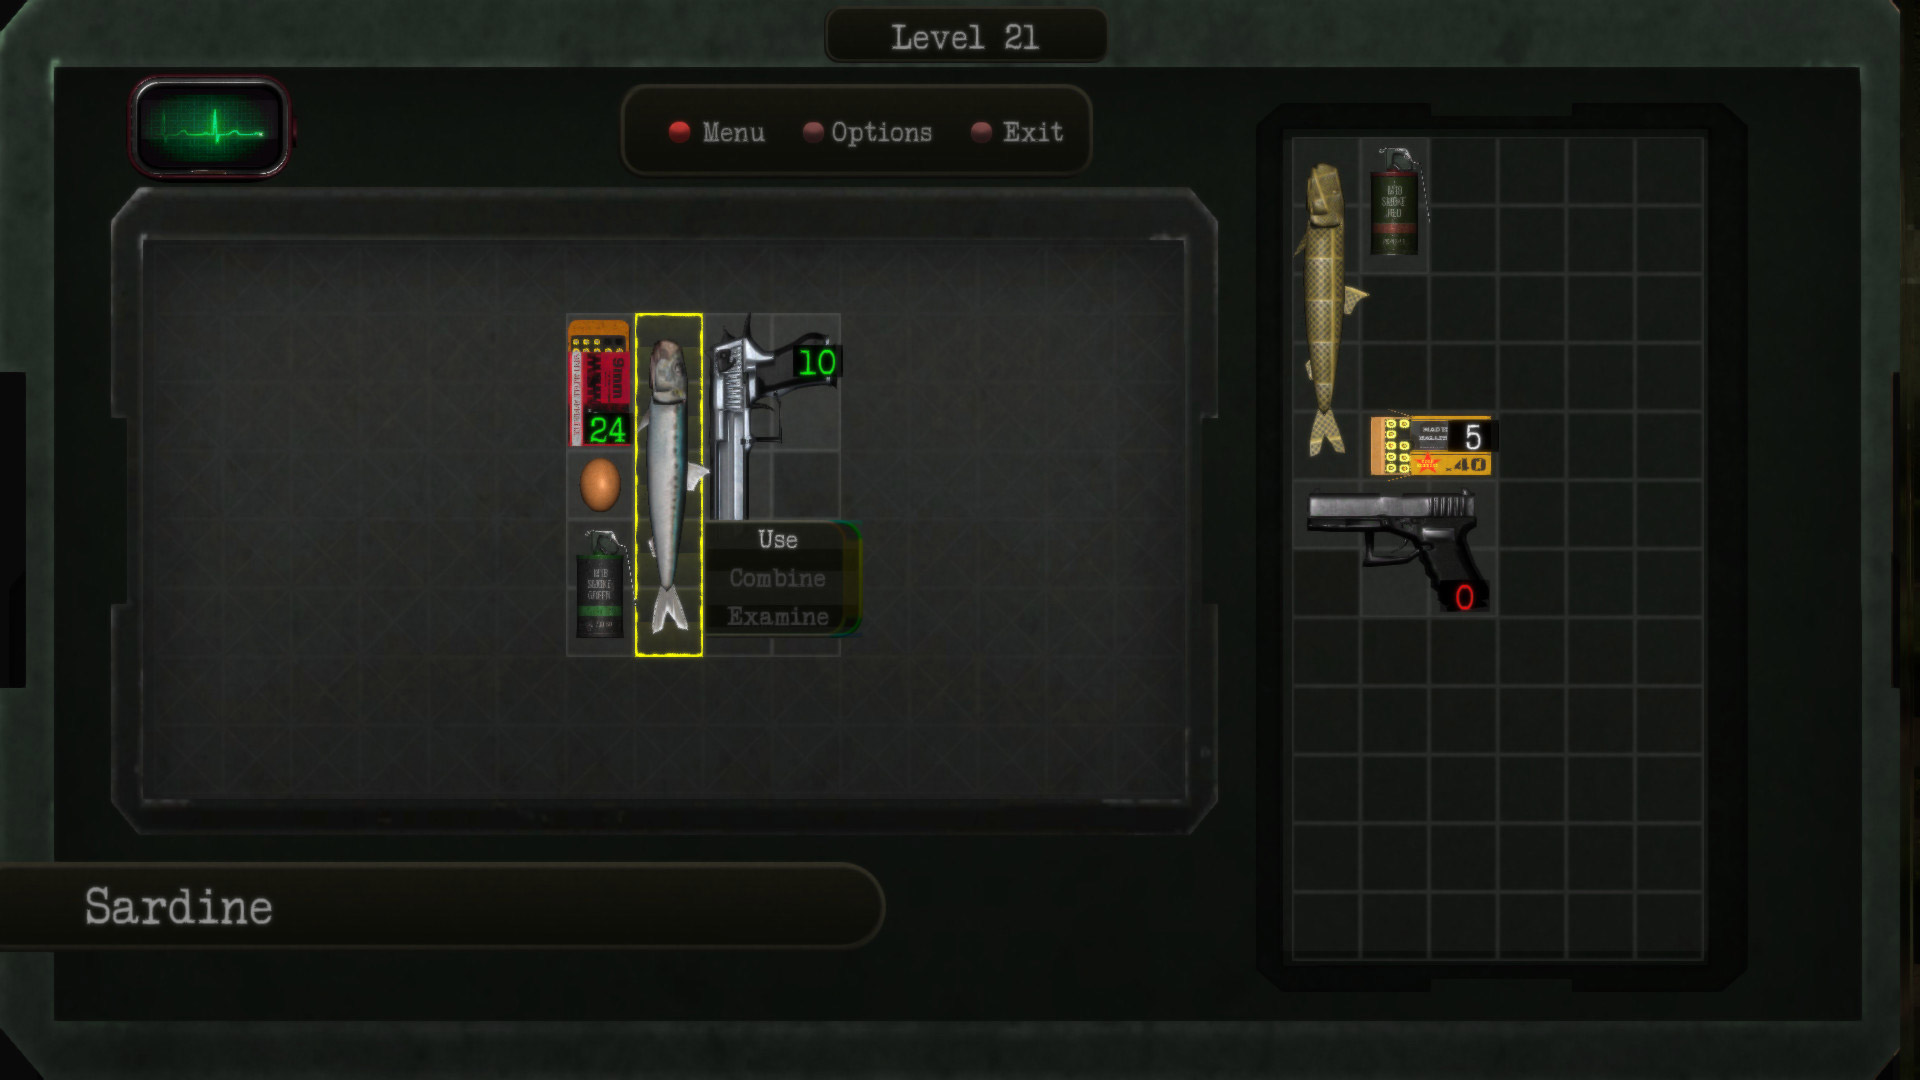 Save Room - Organization Puzzle inventory game like Resident Evil 4